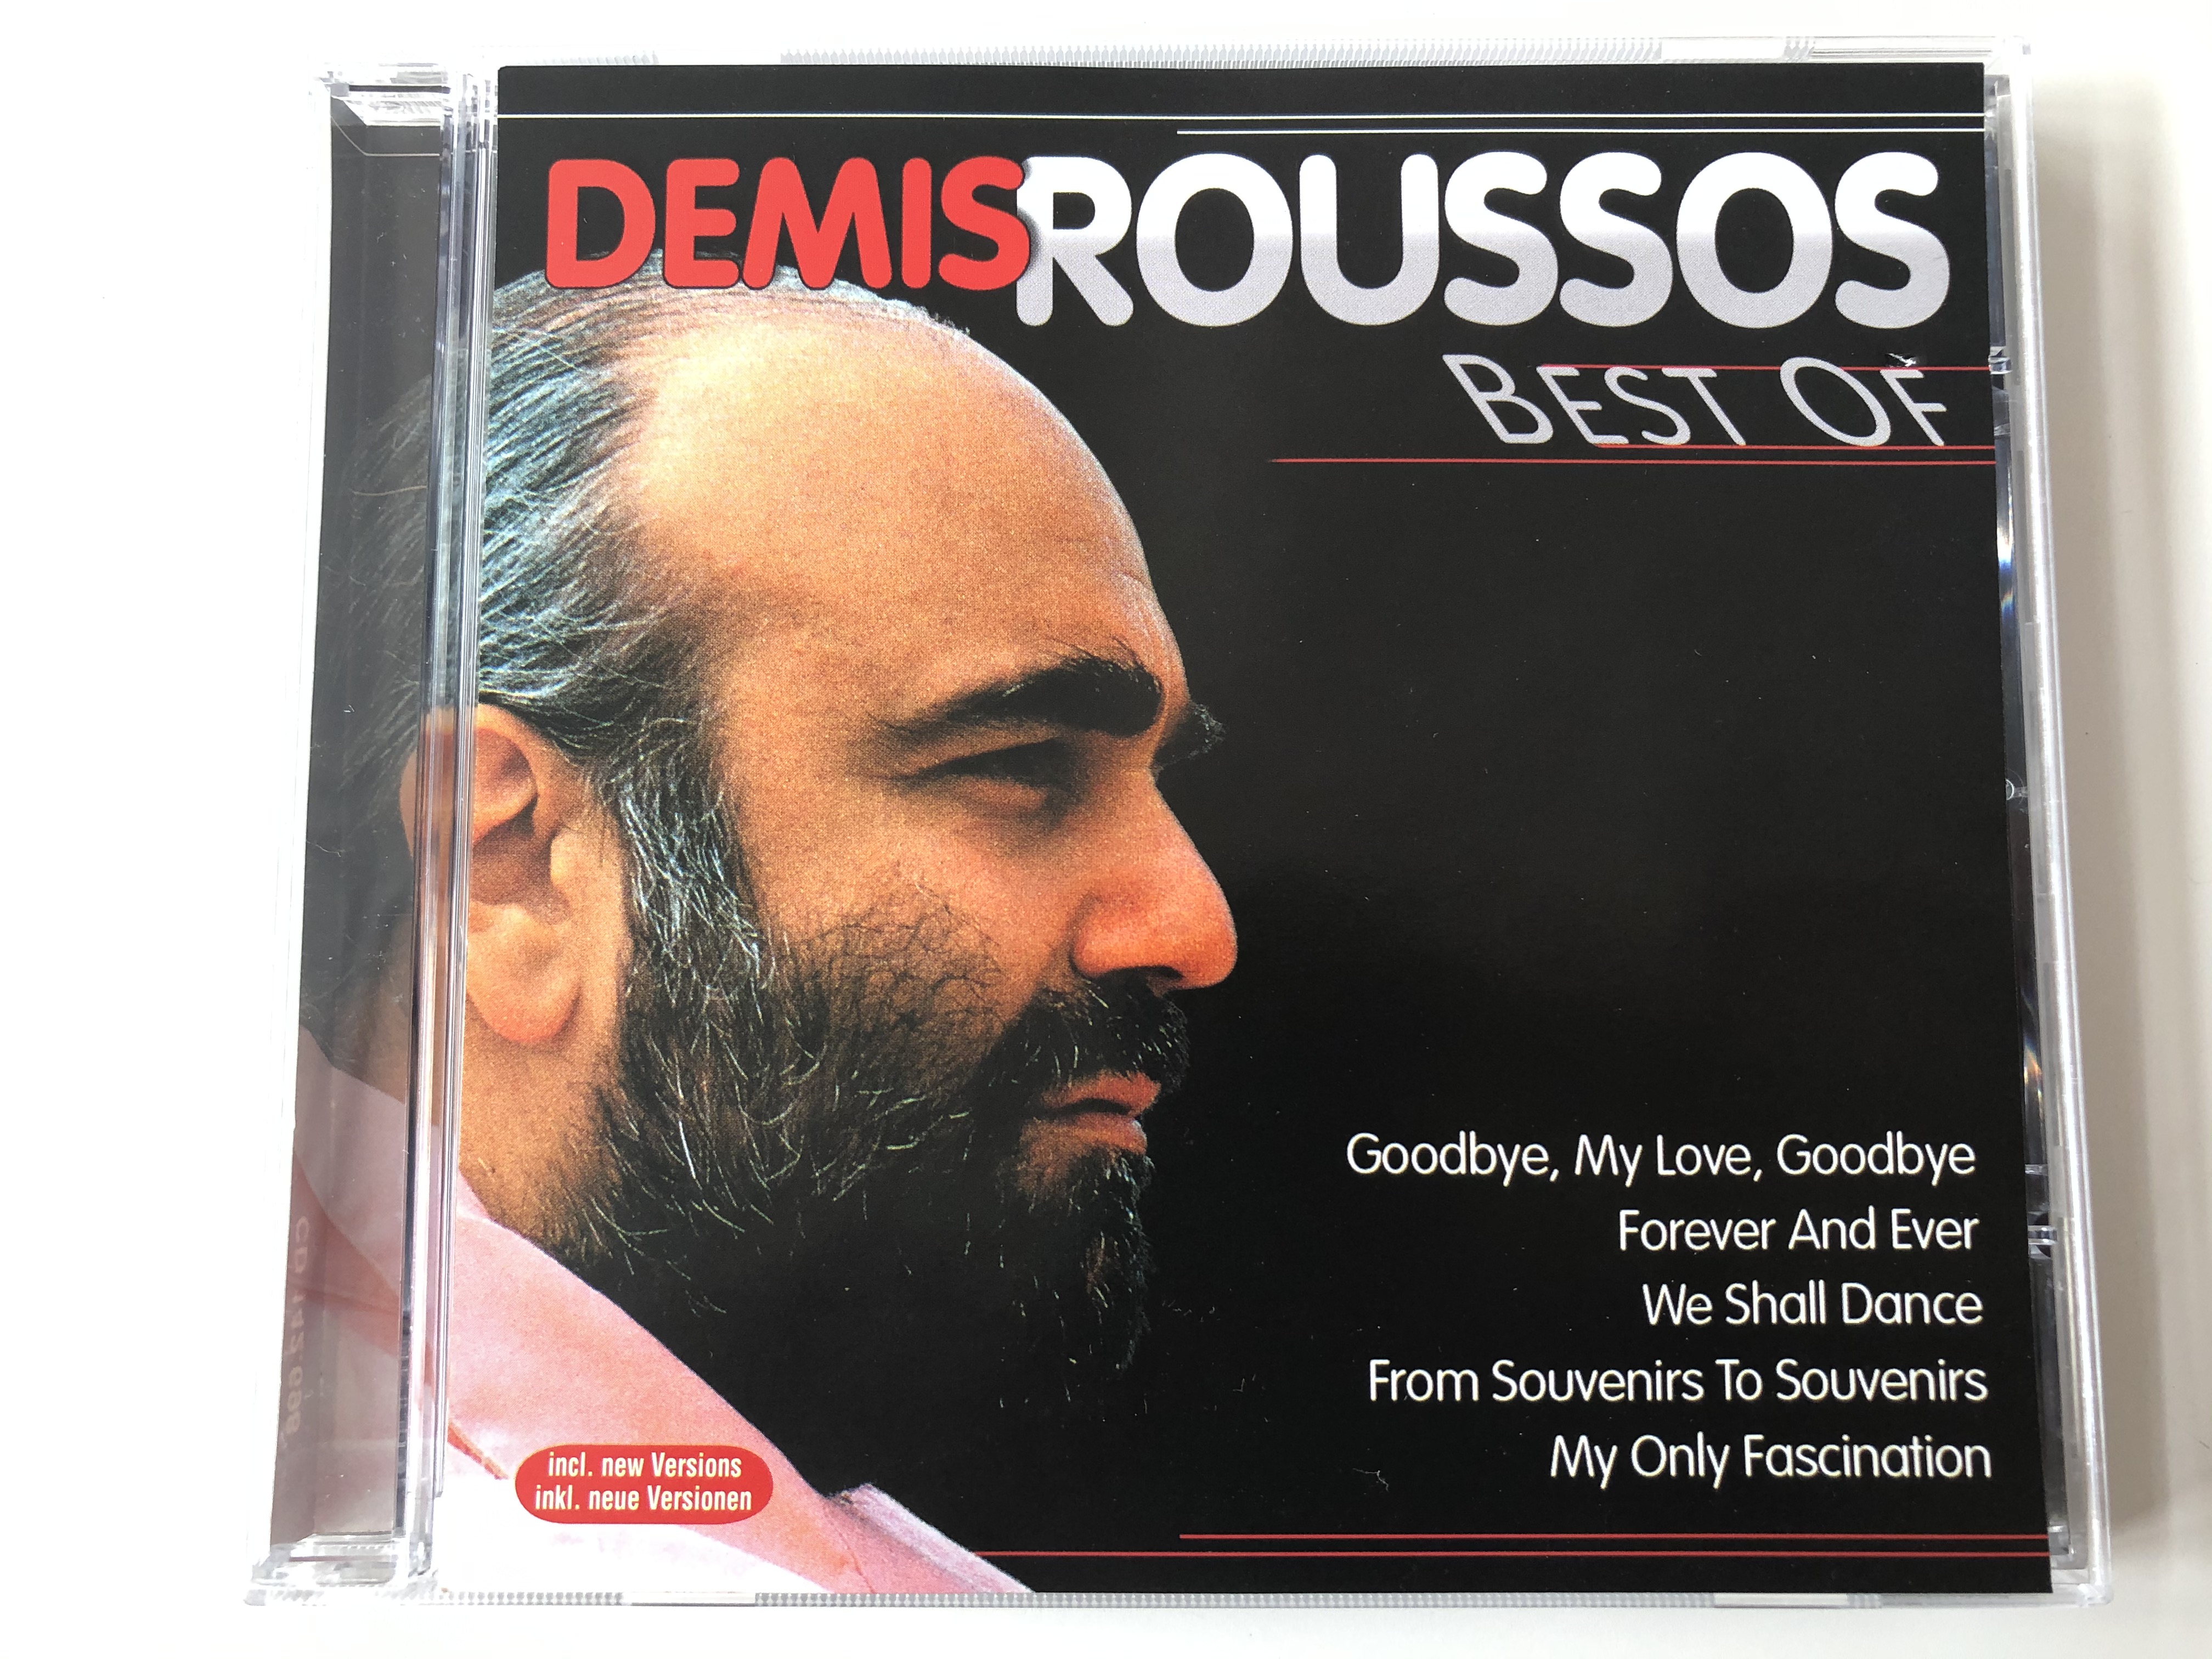 demis-roussos-best-of-goodbye-my-love-goodbye-forever-and-ever-we-shall-dance-from-souvenirs-to-souvenirs-my-only-fascination-eurotrend-audio-cd-2002-stereo-cd-156-1-.jpg